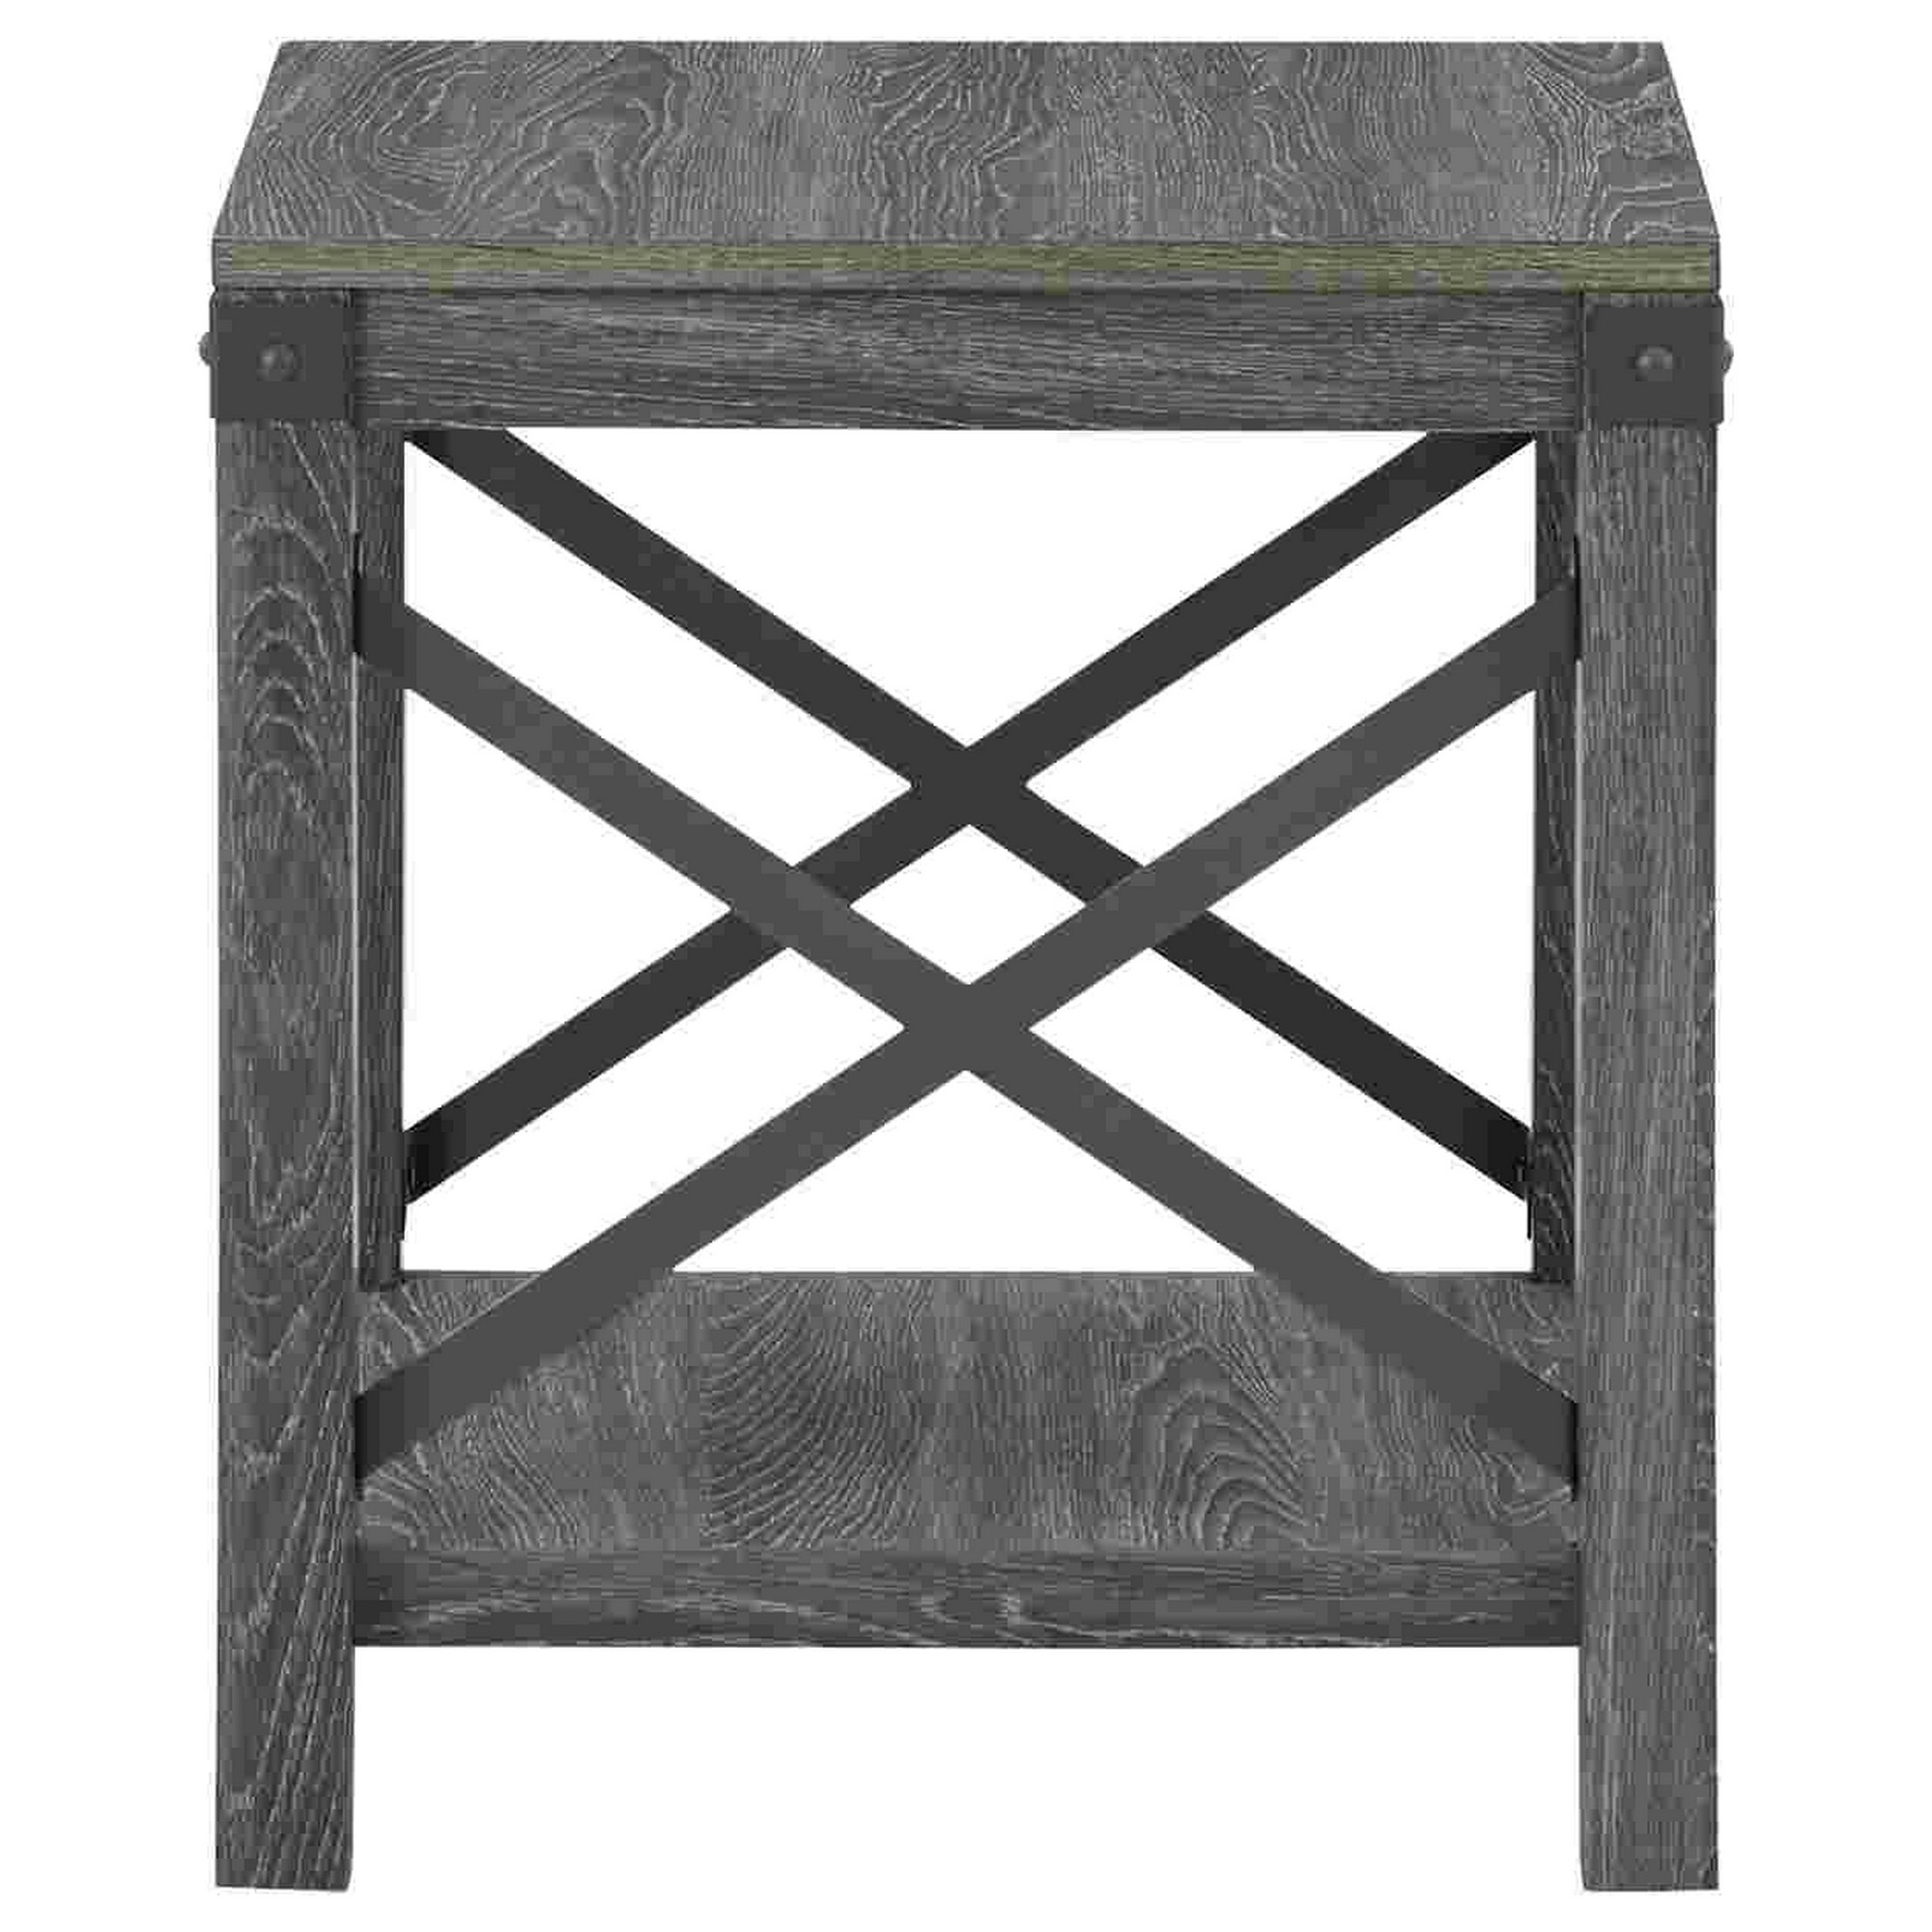 End Table With X Metal Accent And Grain Details, Gray- Saltoro Sherpi